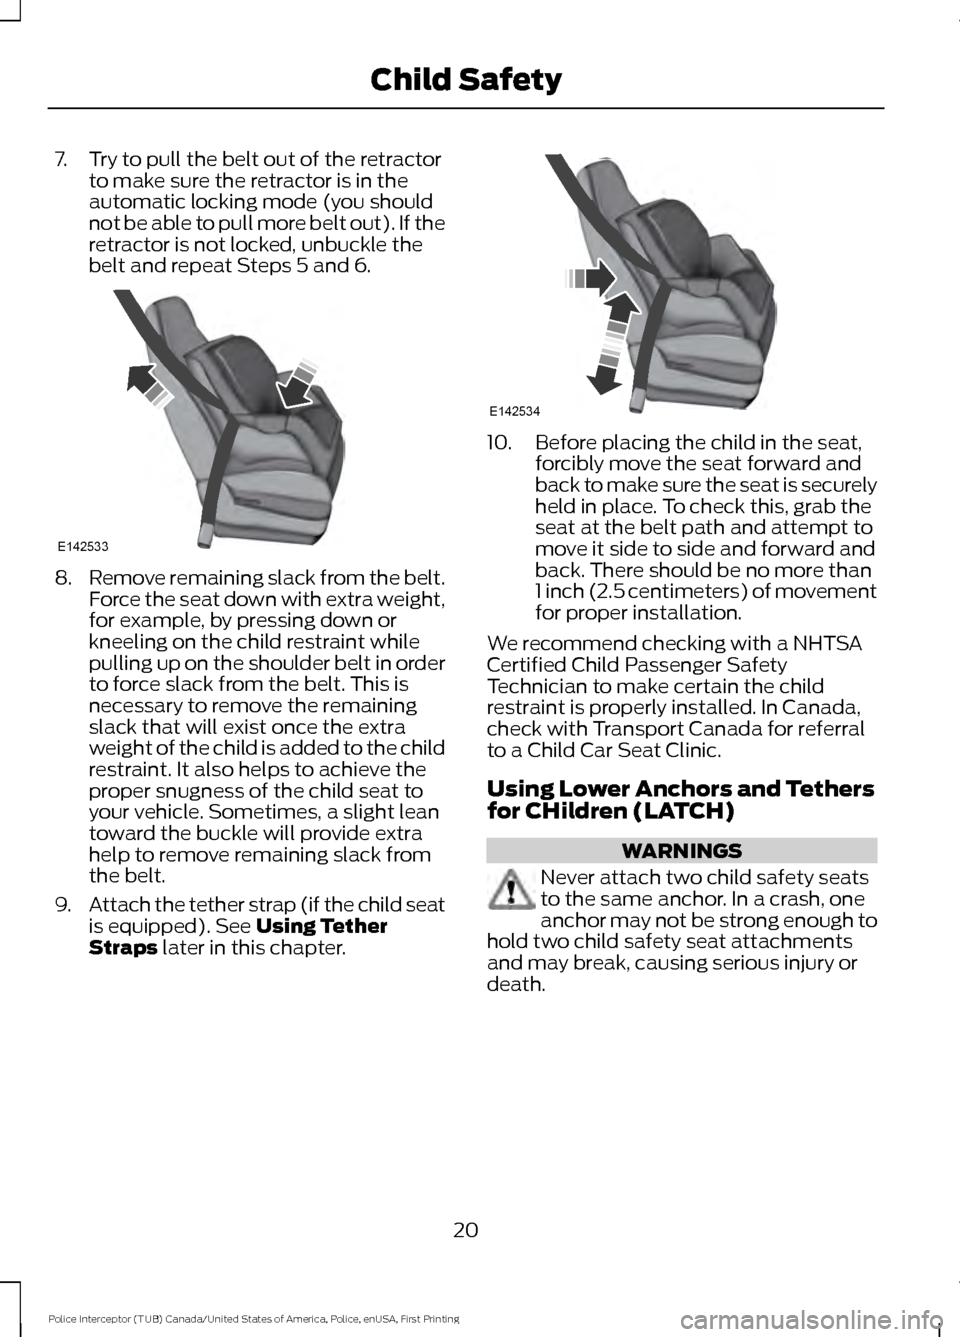 FORD POLICE INTERCEPTOR UTILITY 2017 1.G User Guide 7. Try to pull the belt out of the retractor
to make sure the retractor is in the
automatic locking mode (you should
not be able to pull more belt out). If the
retractor is not locked, unbuckle the
be